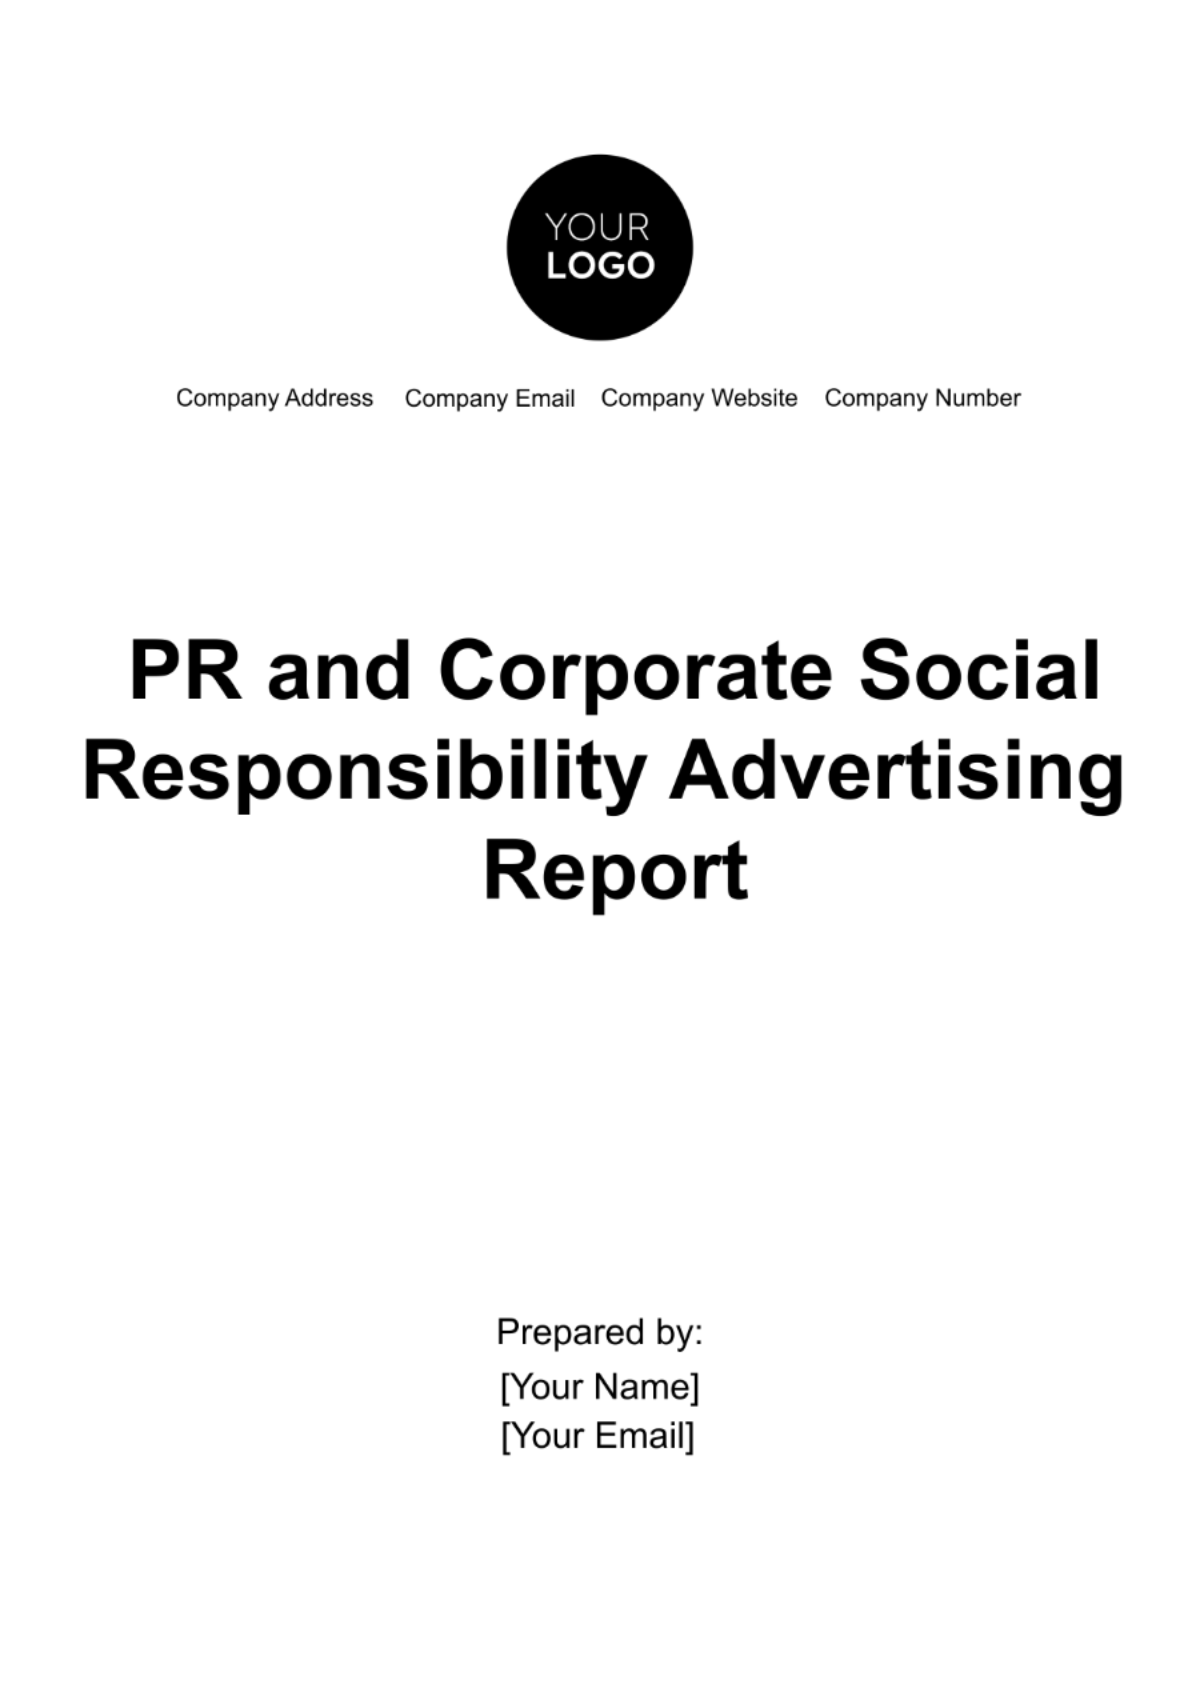 PR and Corporate Social Responsibility Advertising Report Template